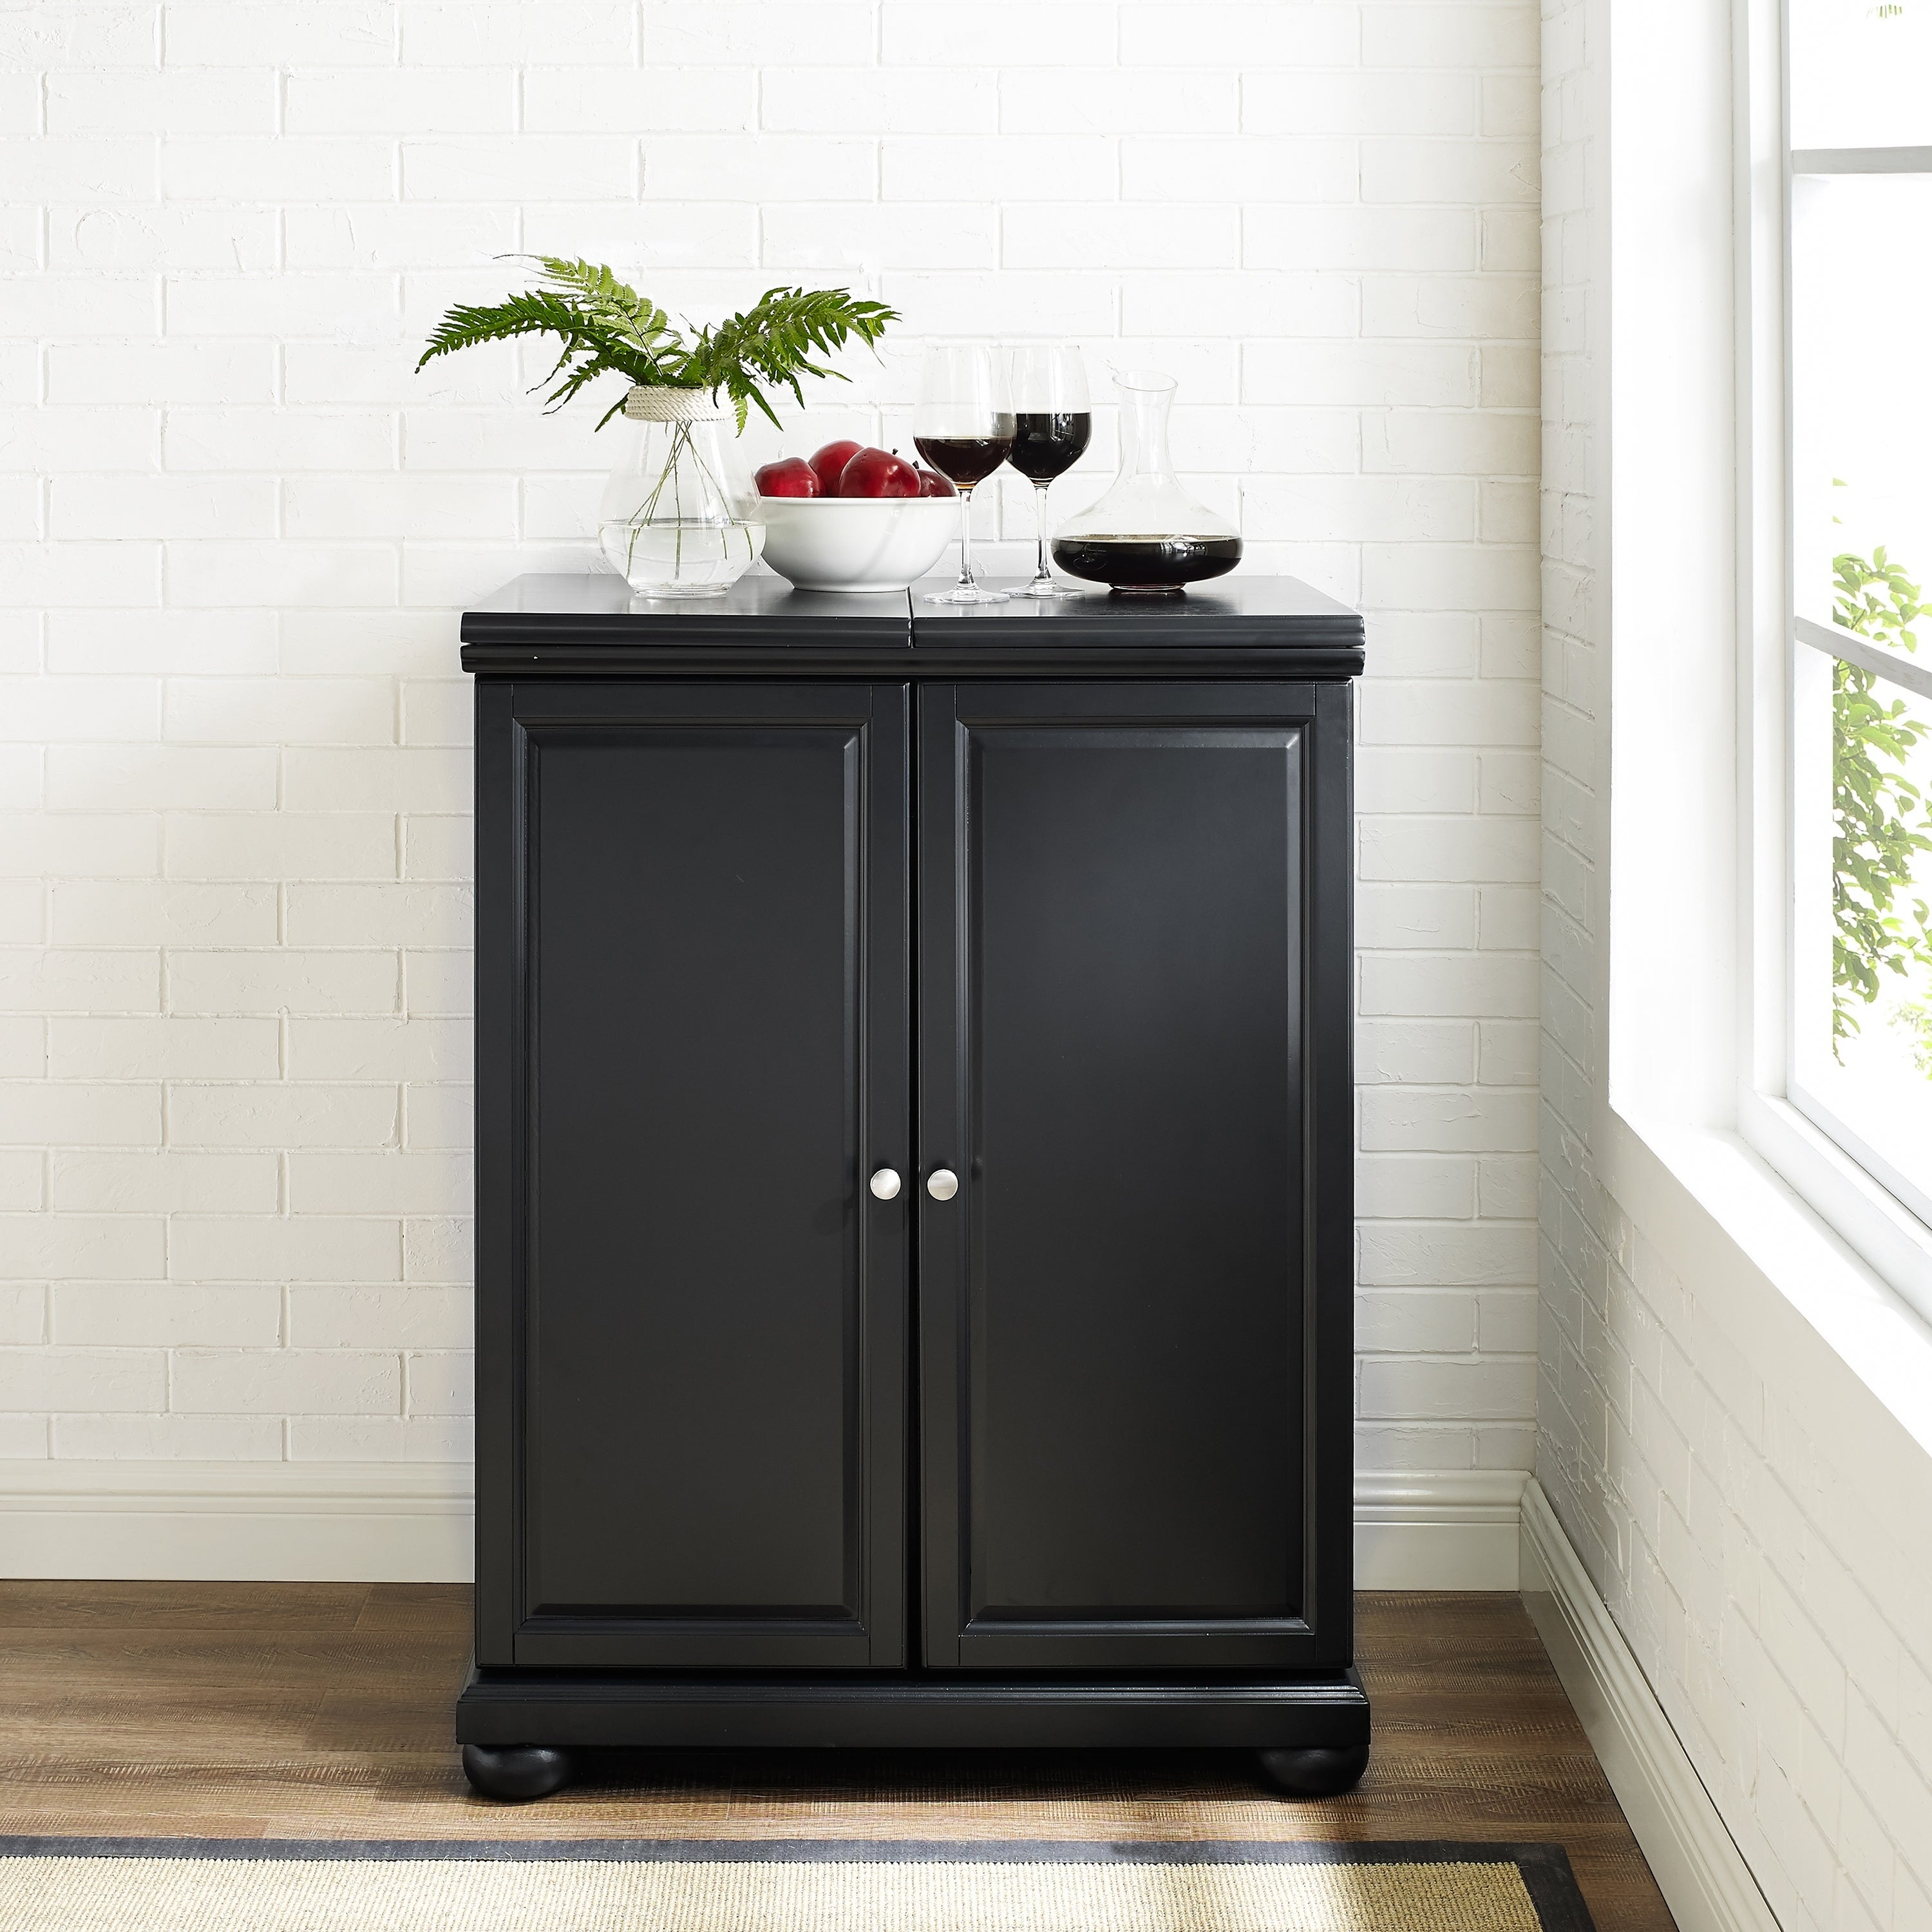 Alexandria Black Finish Expandable Bar Cabinet Na intended for size 3000 X 3000